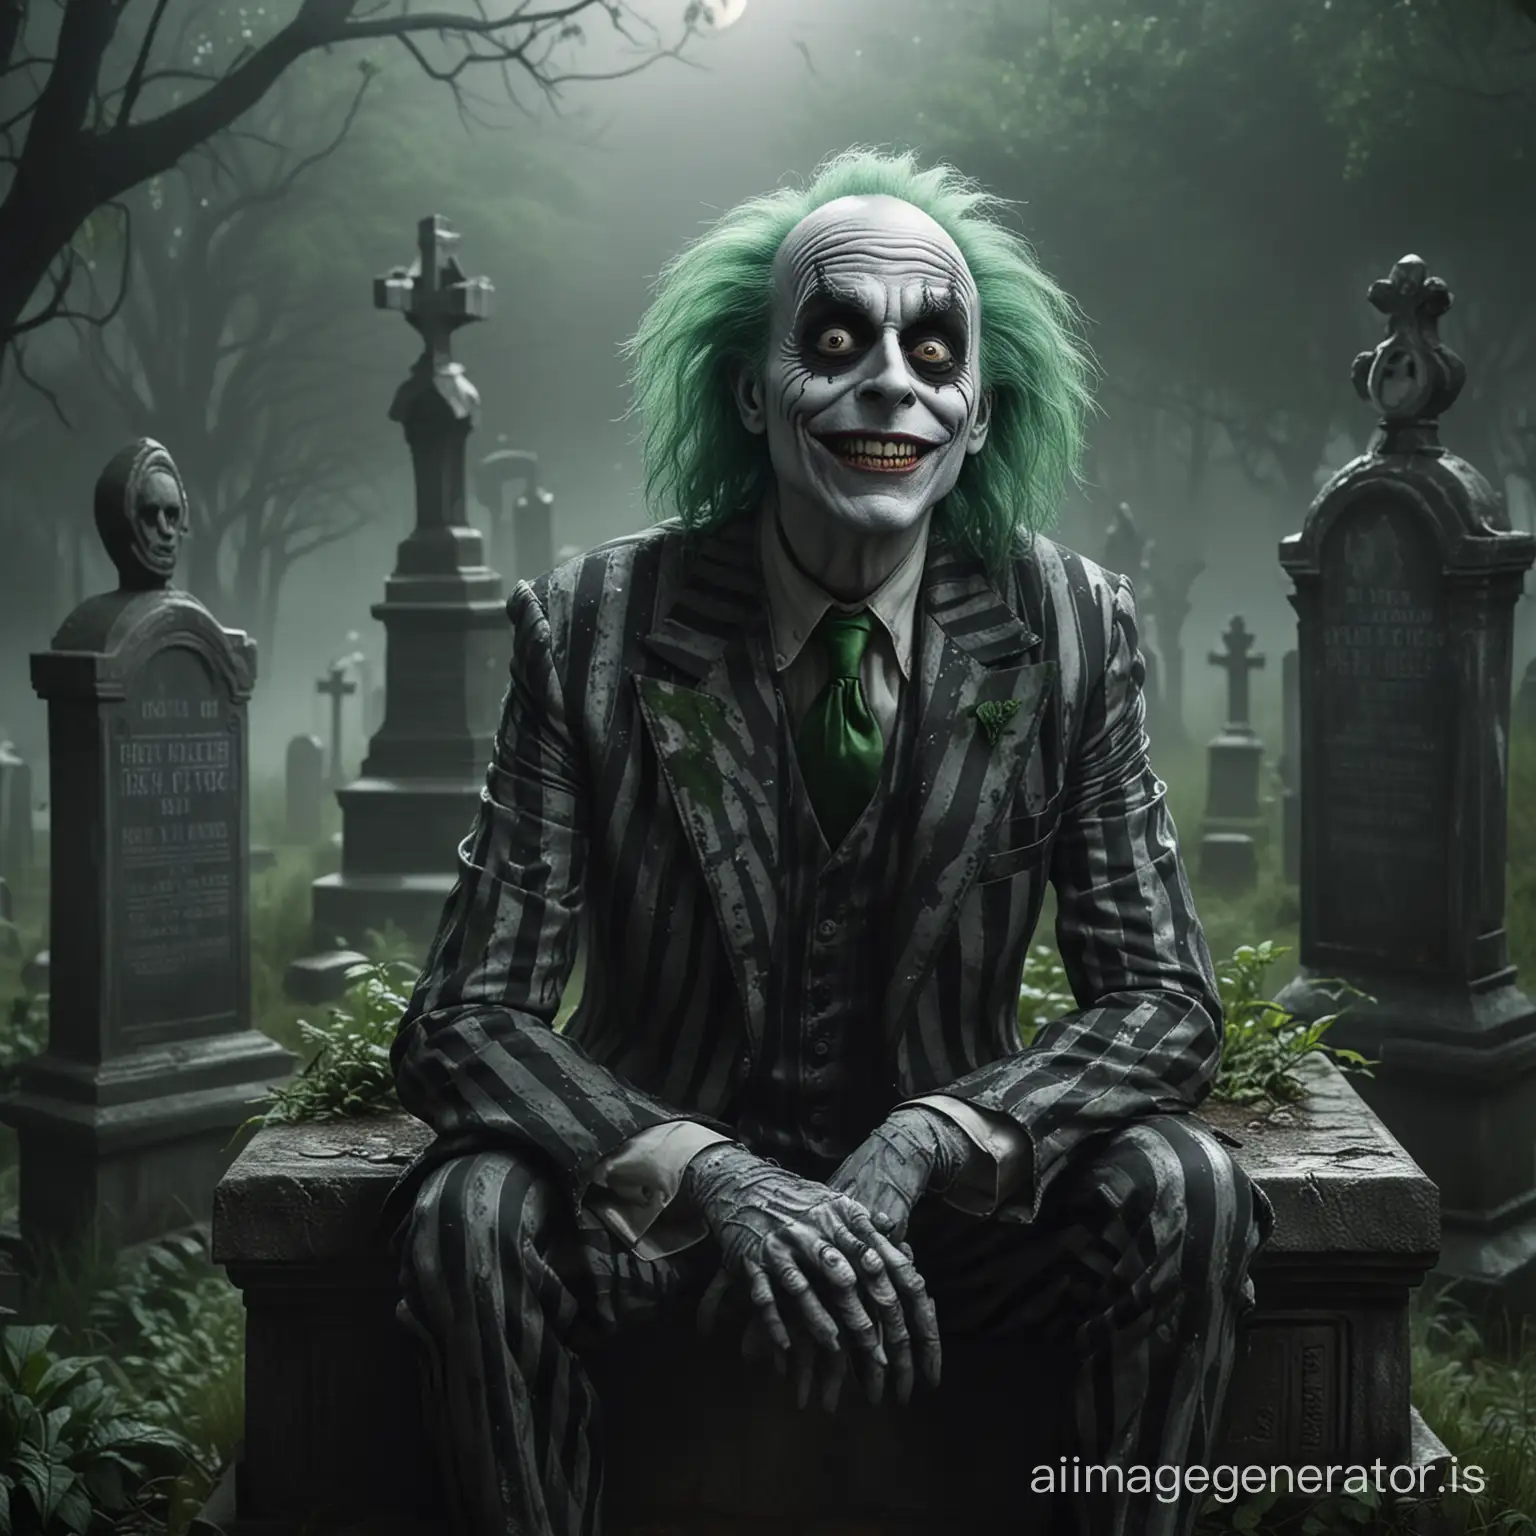 Beetlejuice sitting on an ornate tombstone in a fog-filled graveyard, featuring his iconic black and white striped suit and disheveled green hair. His face is twisted into a sinister smile, eyes gleaming with mischief. The graveyard around him is dense with overgrown vegetation and ancient, crumbling tombstones under a dim, ghostly light. This image captures a chilling yet whimsically macabre atmosphere, reflecting Beetlejuice's dark humor. The artwork is rendered in a gothic style, with heavy shadows and sharp contrasts, using digital art to enhance the eerie and fantastical elements. --ar 16:9 --v5